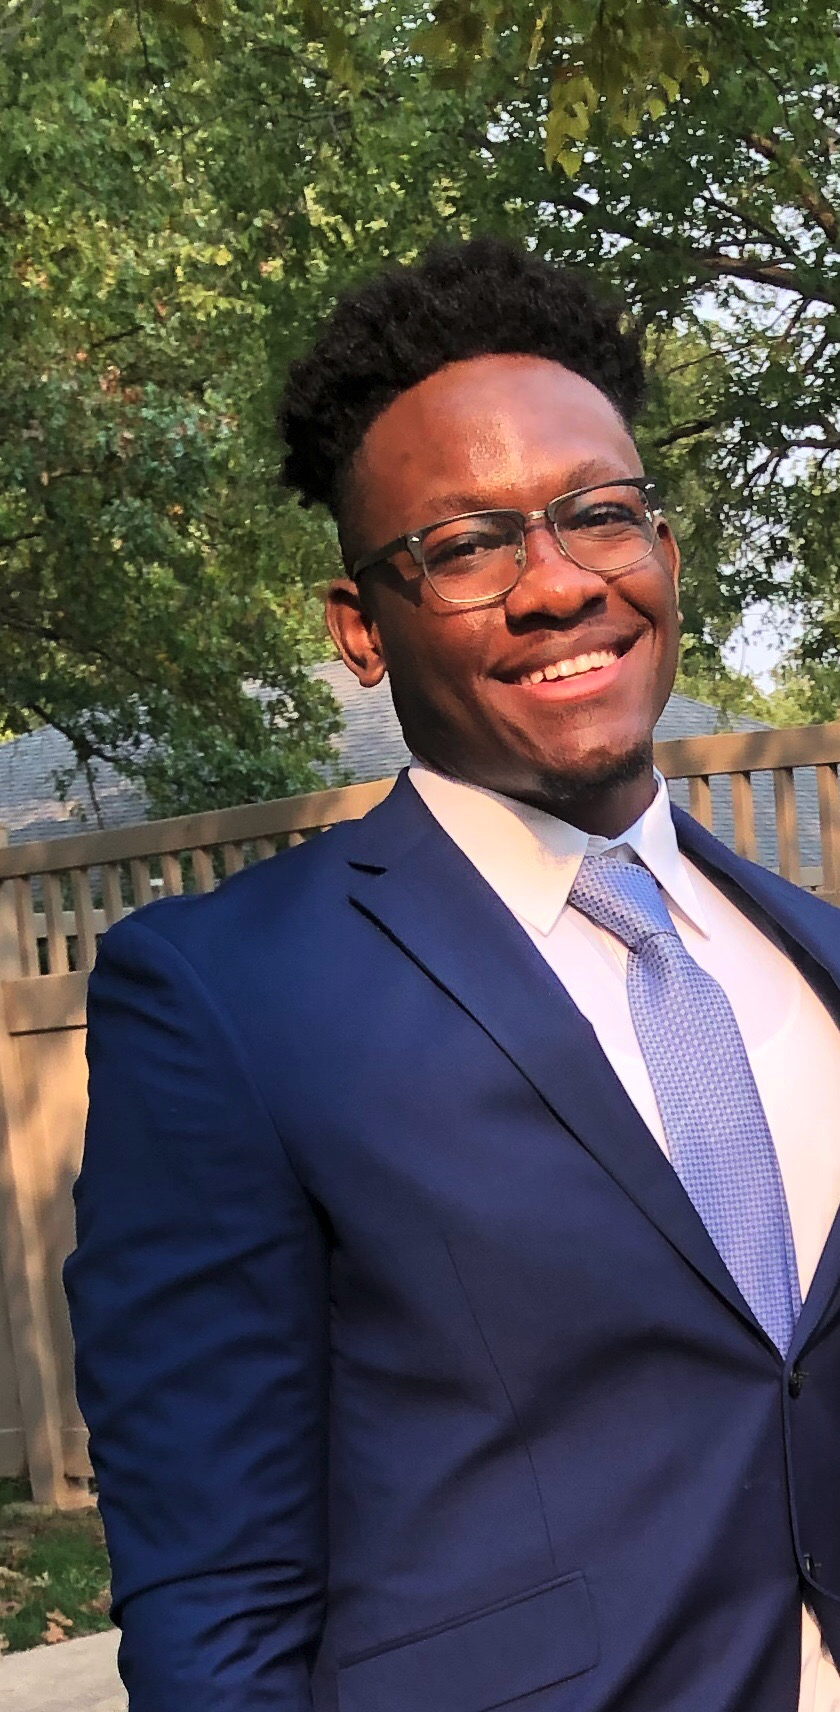 Mischael Saint-Sume, a Howard University student waiting to hear from a variety of medical schools, hopes one day to open a surgery clinic in his medically underserved community in South Florida.